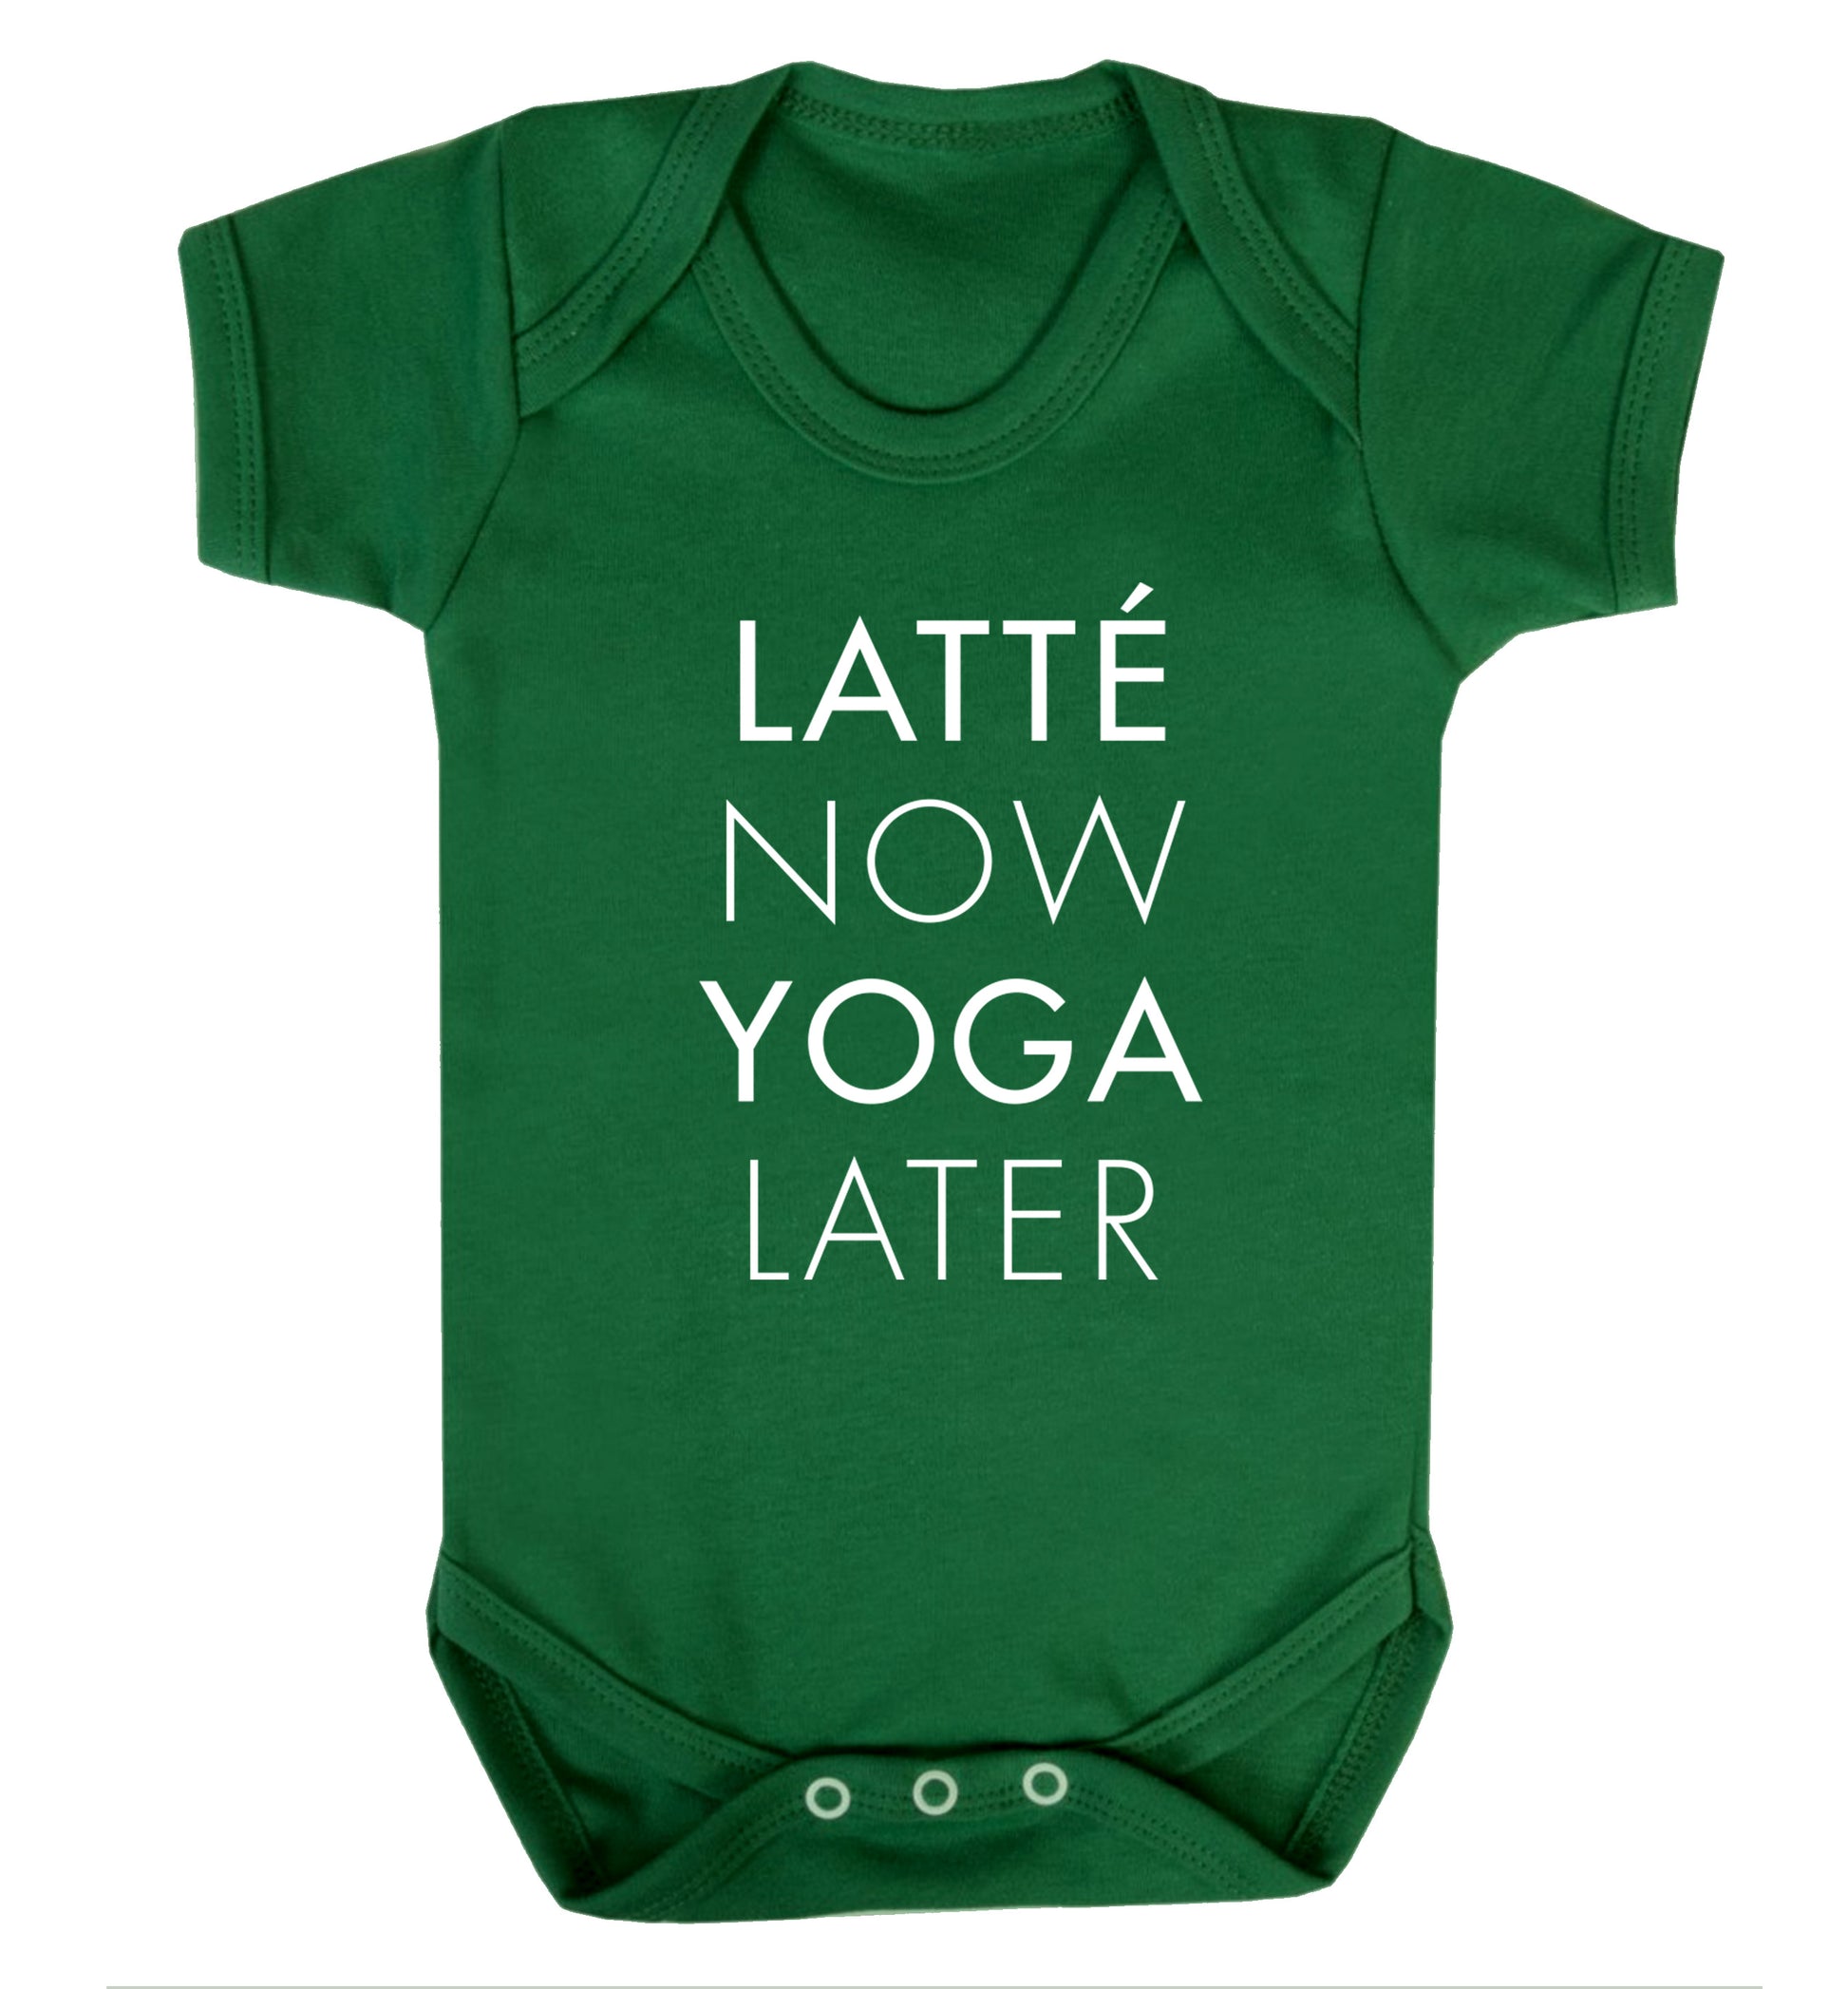 Latte now yoga later Baby Vest green 18-24 months